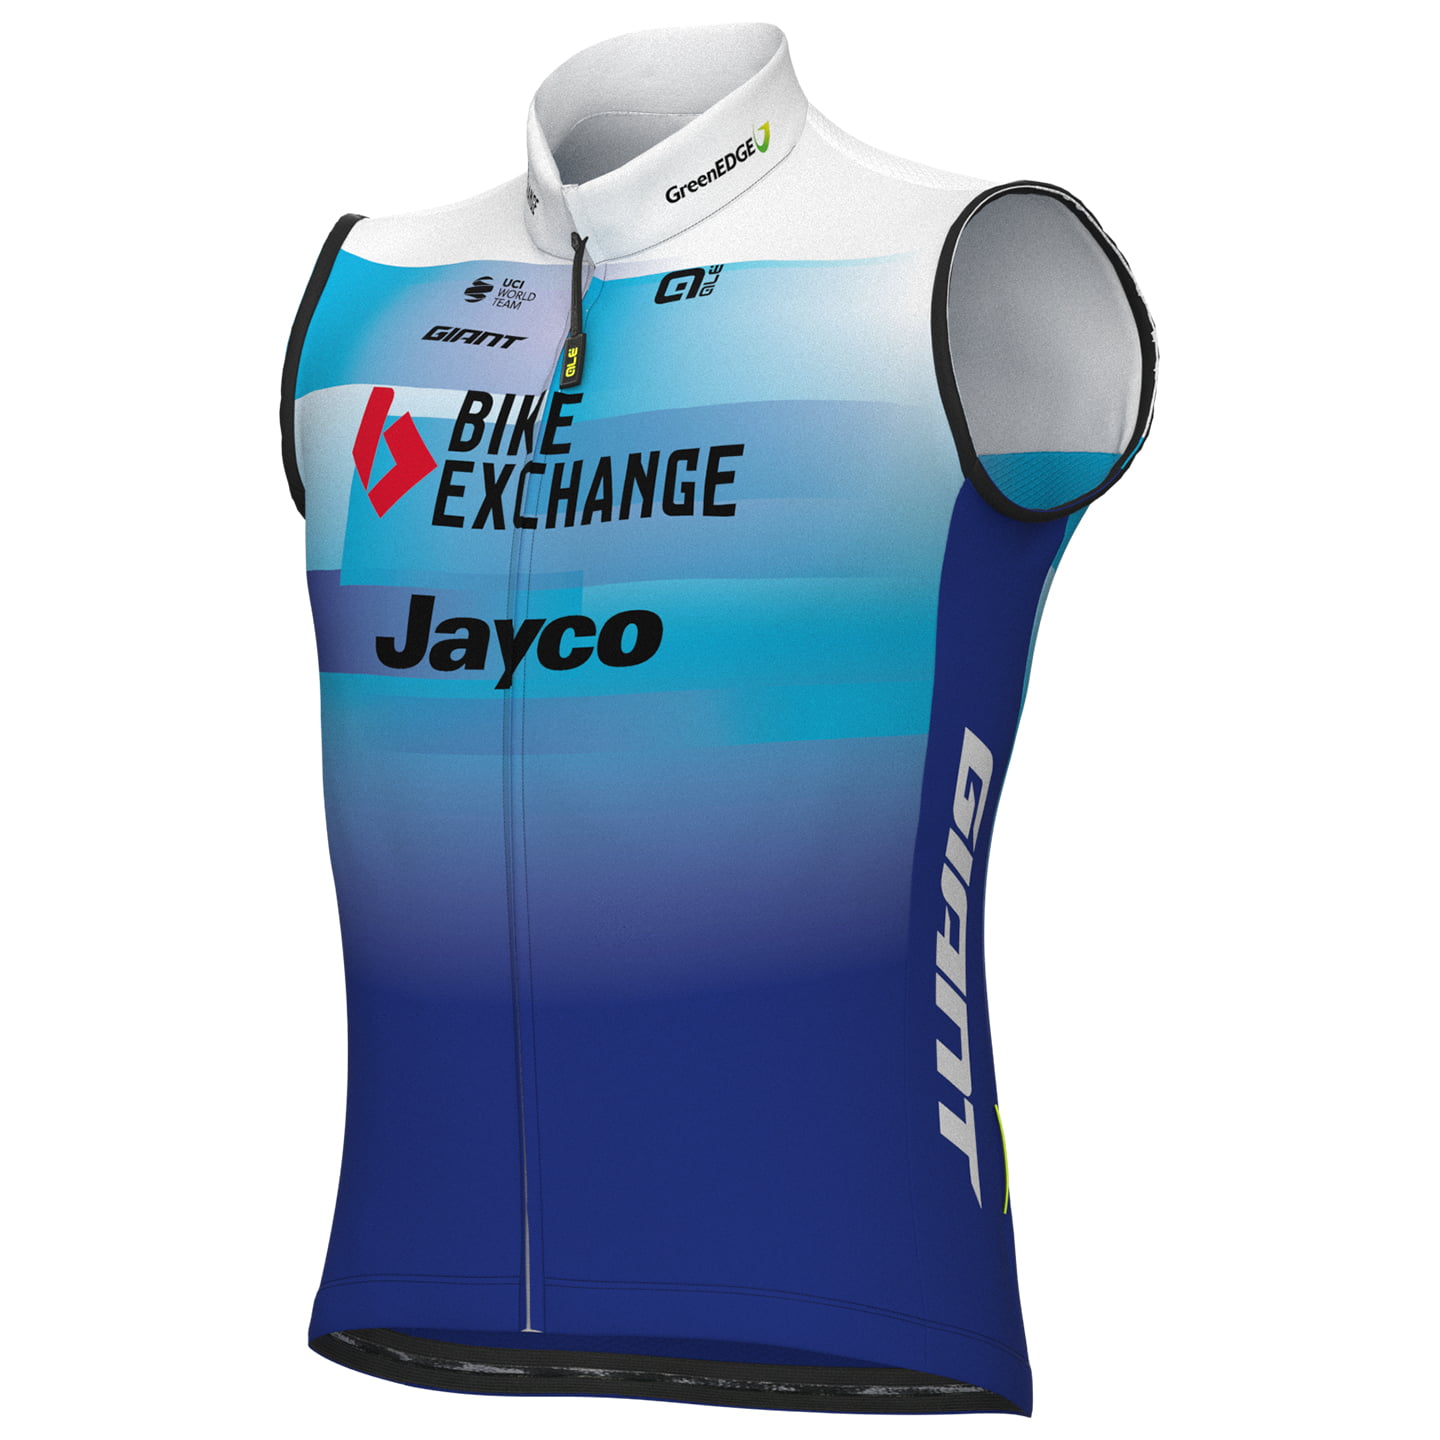 TEAM BIKEEXCHANGE-JAYCO 2022 Wind Vest, for men, size M, Cycling vest, Cycle clothing